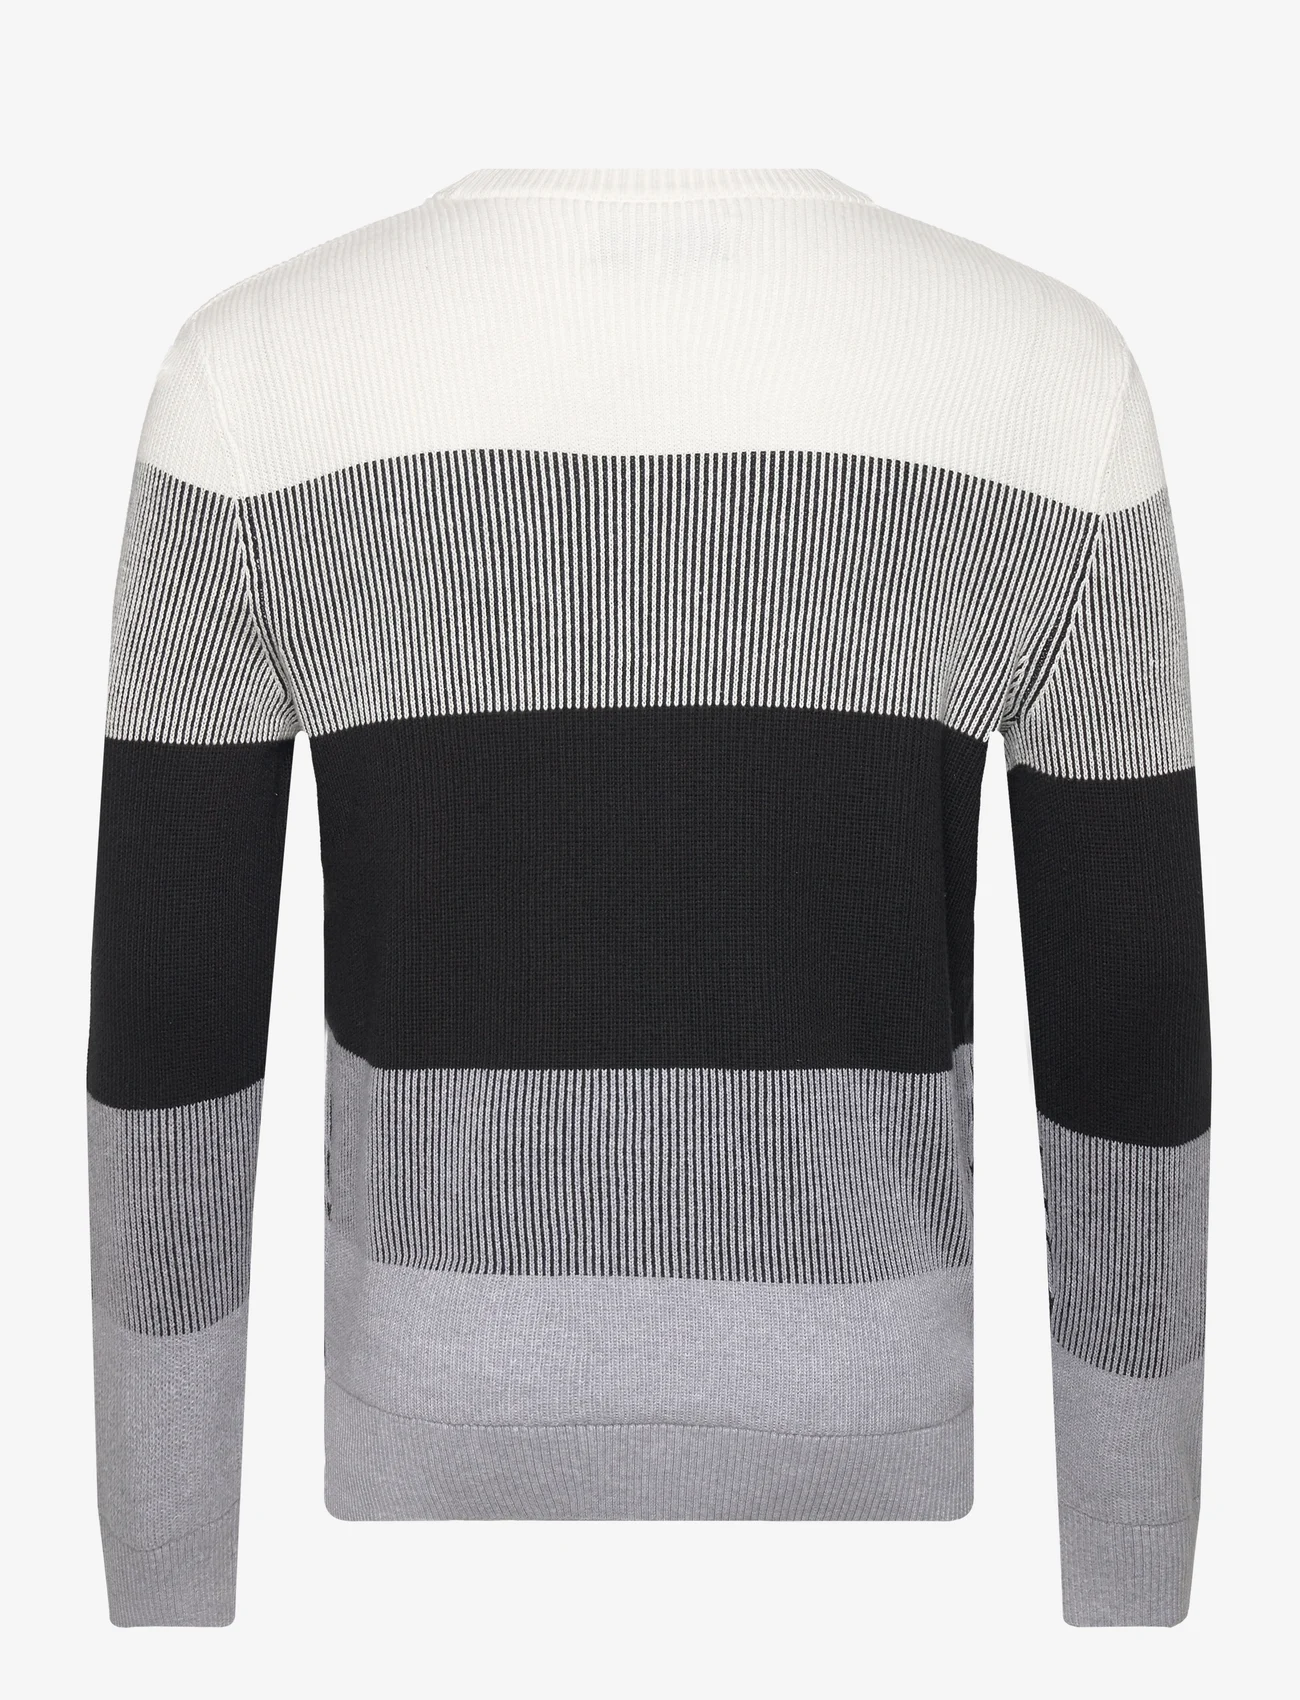 Tom Tailor - structured colorblock  knit - knitted round necks - white black grey colorblock - 1